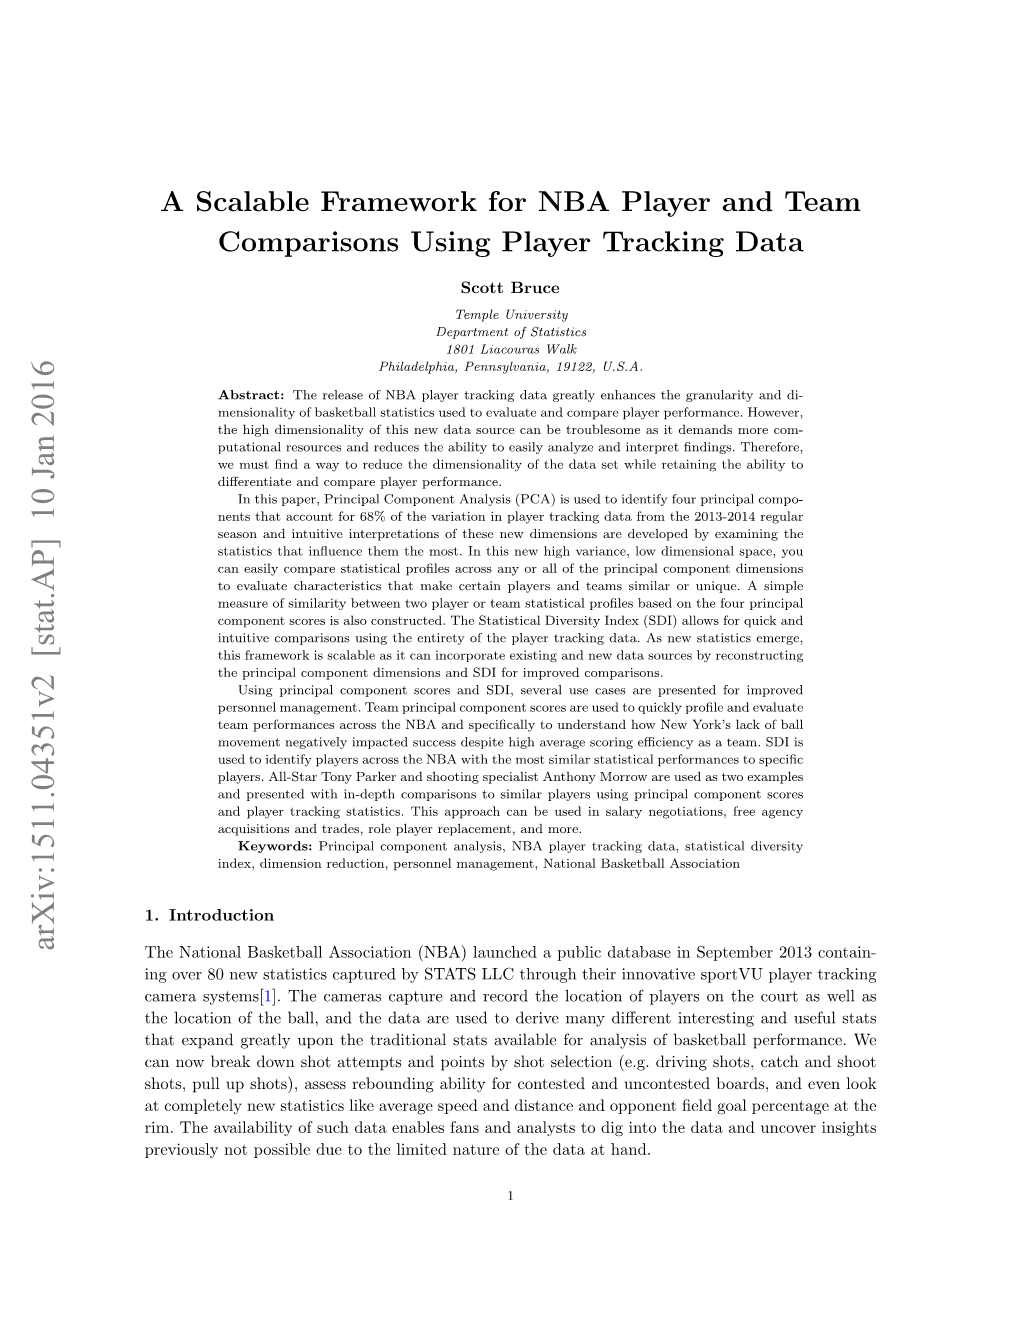 A Scalable Framework for NBA Player and Team Comparisons Using Player Tracking Data